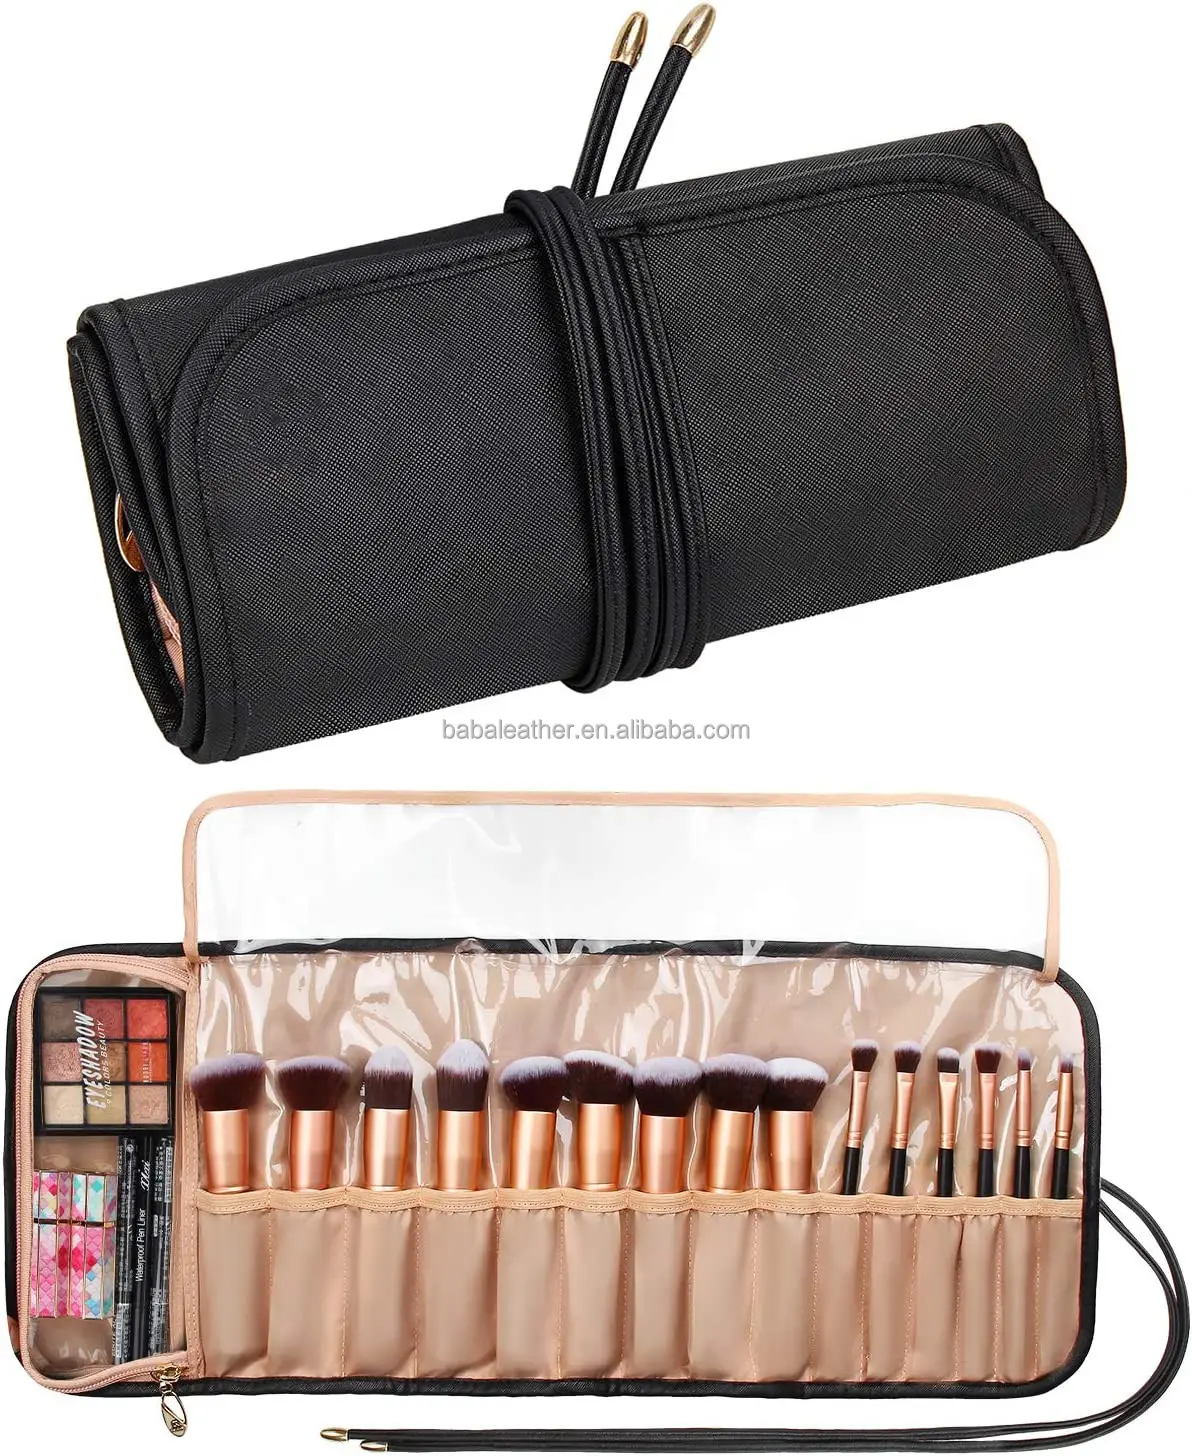 Travel Portable Makeup Brush Bag Pouch Holder Cosmetic Bag Organizer Cosmetics Brushes Leather Case Makeup Brush Rolling Case